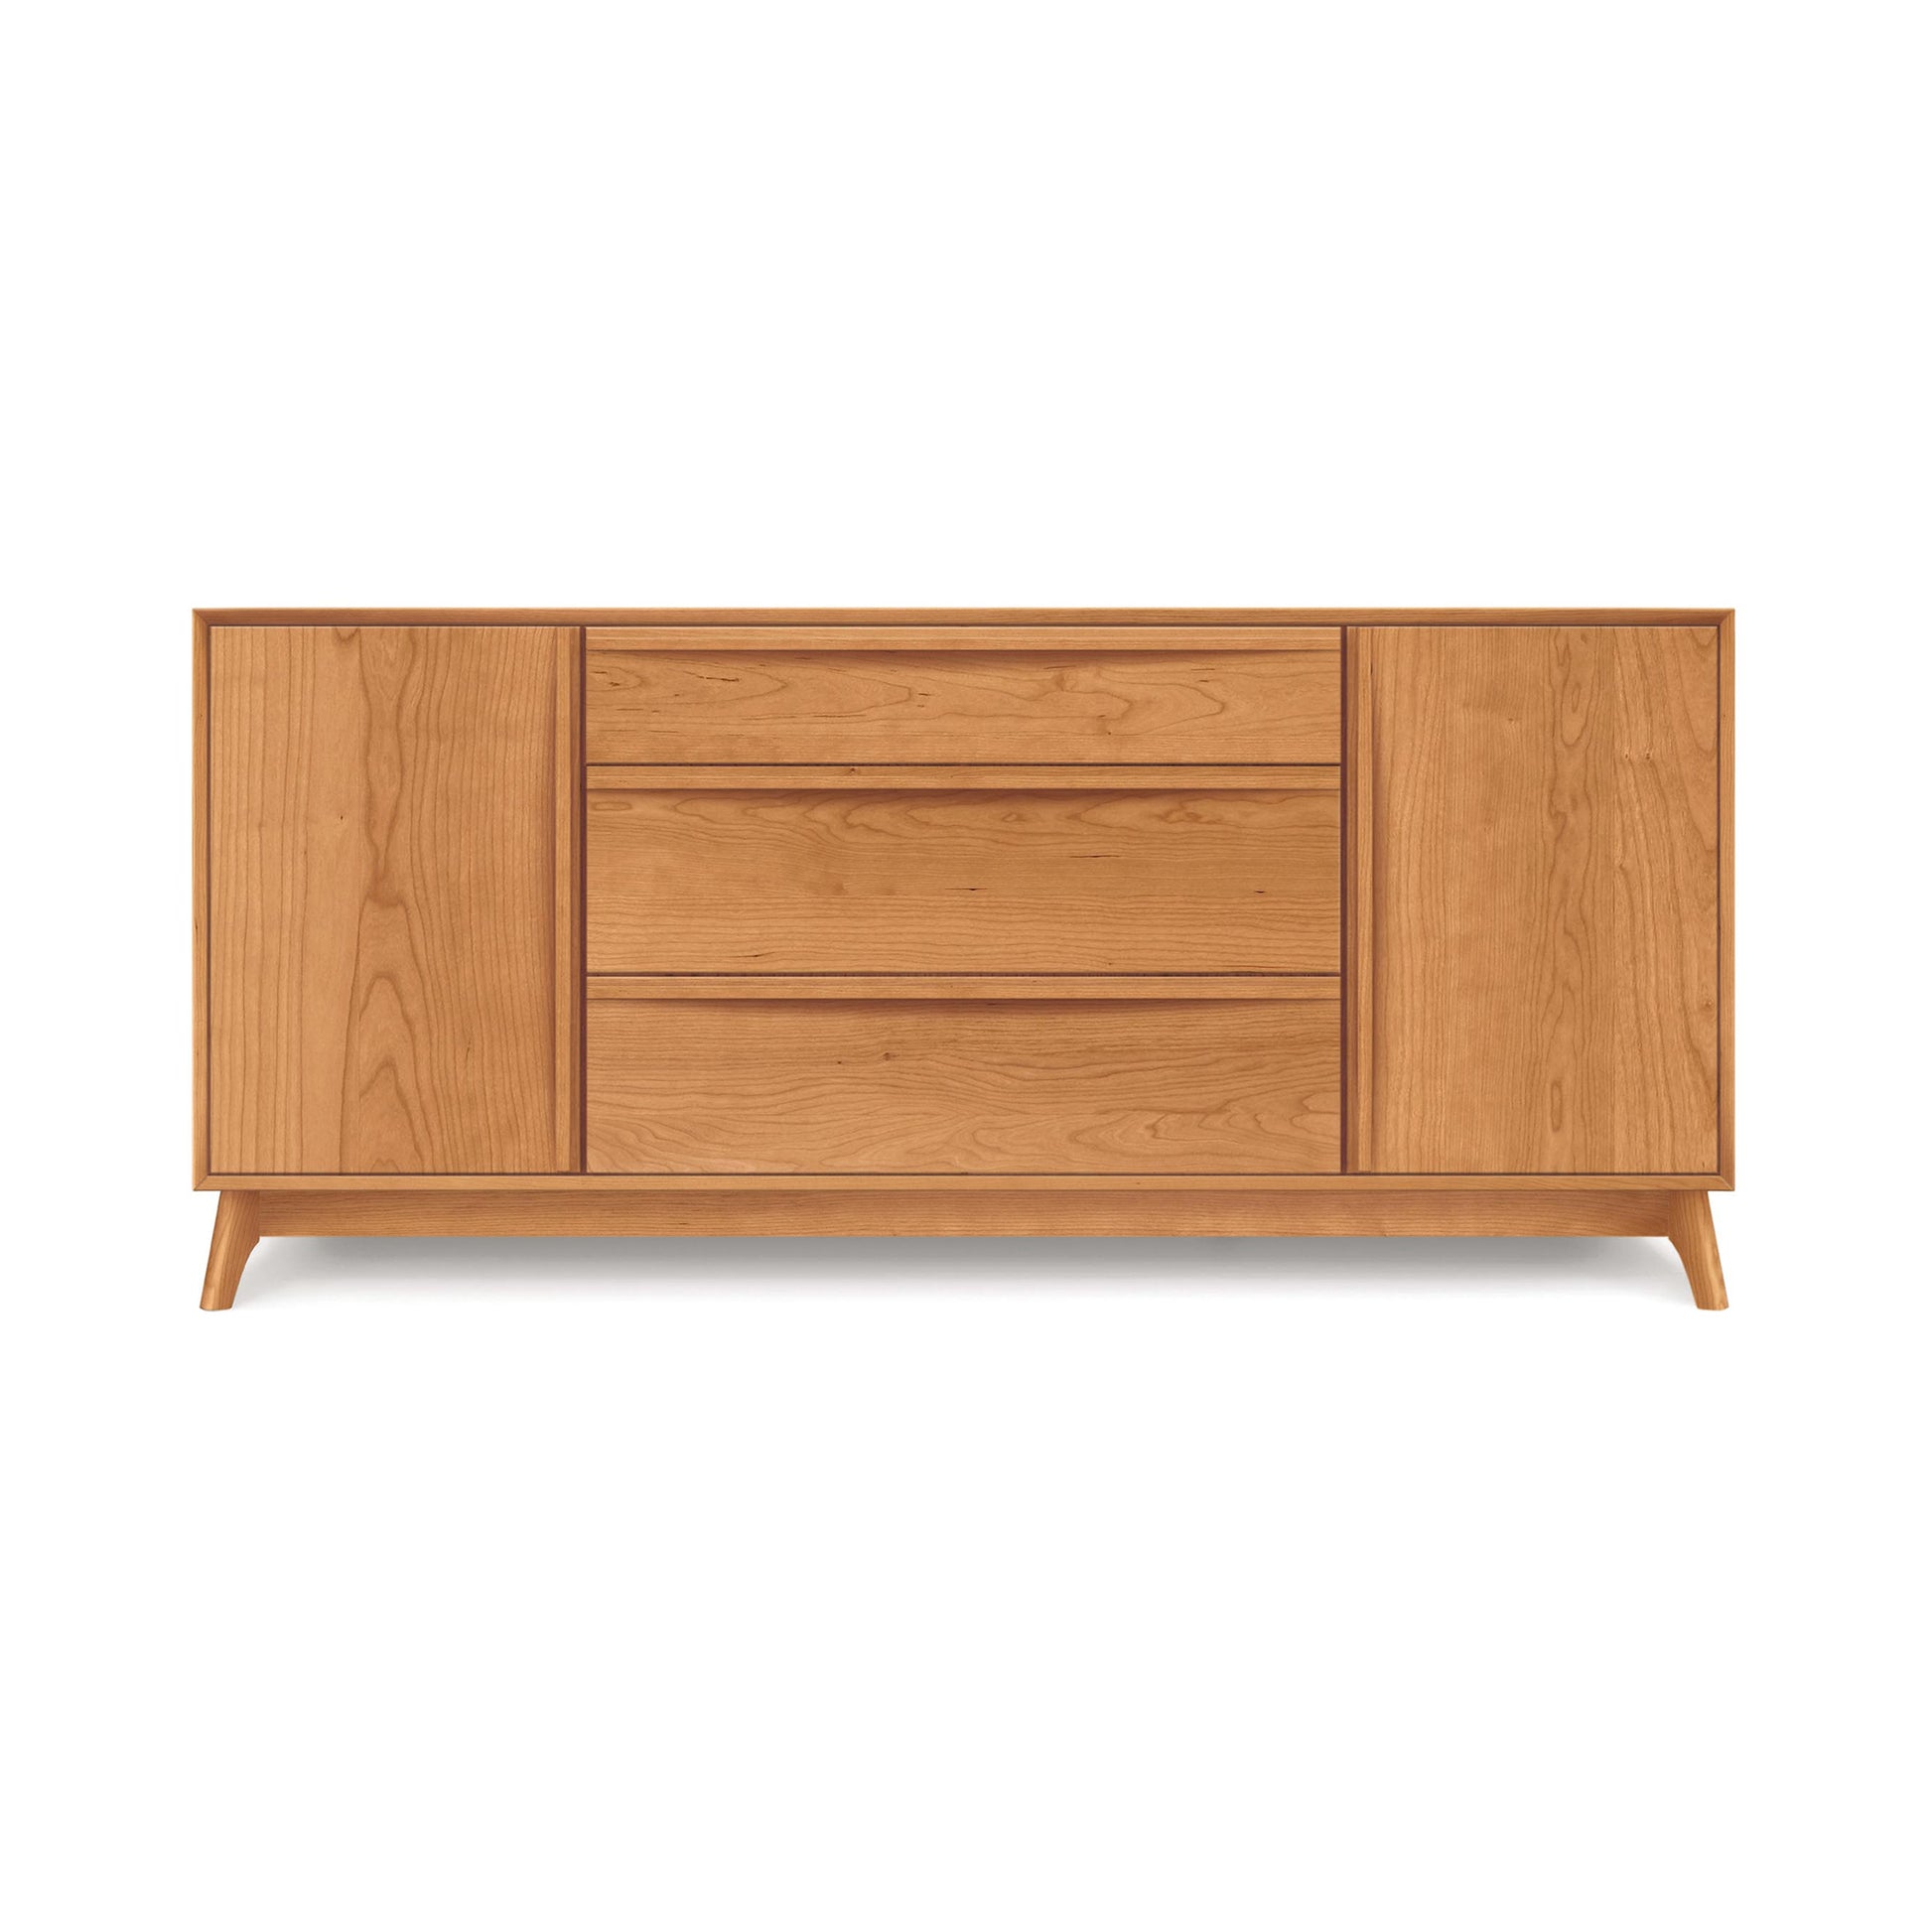 A Catalina 3-Drawers, 2-Door Buffet with two side doors and three drawers in the center, set against a white background. (Brand Name: Copeland Furniture)